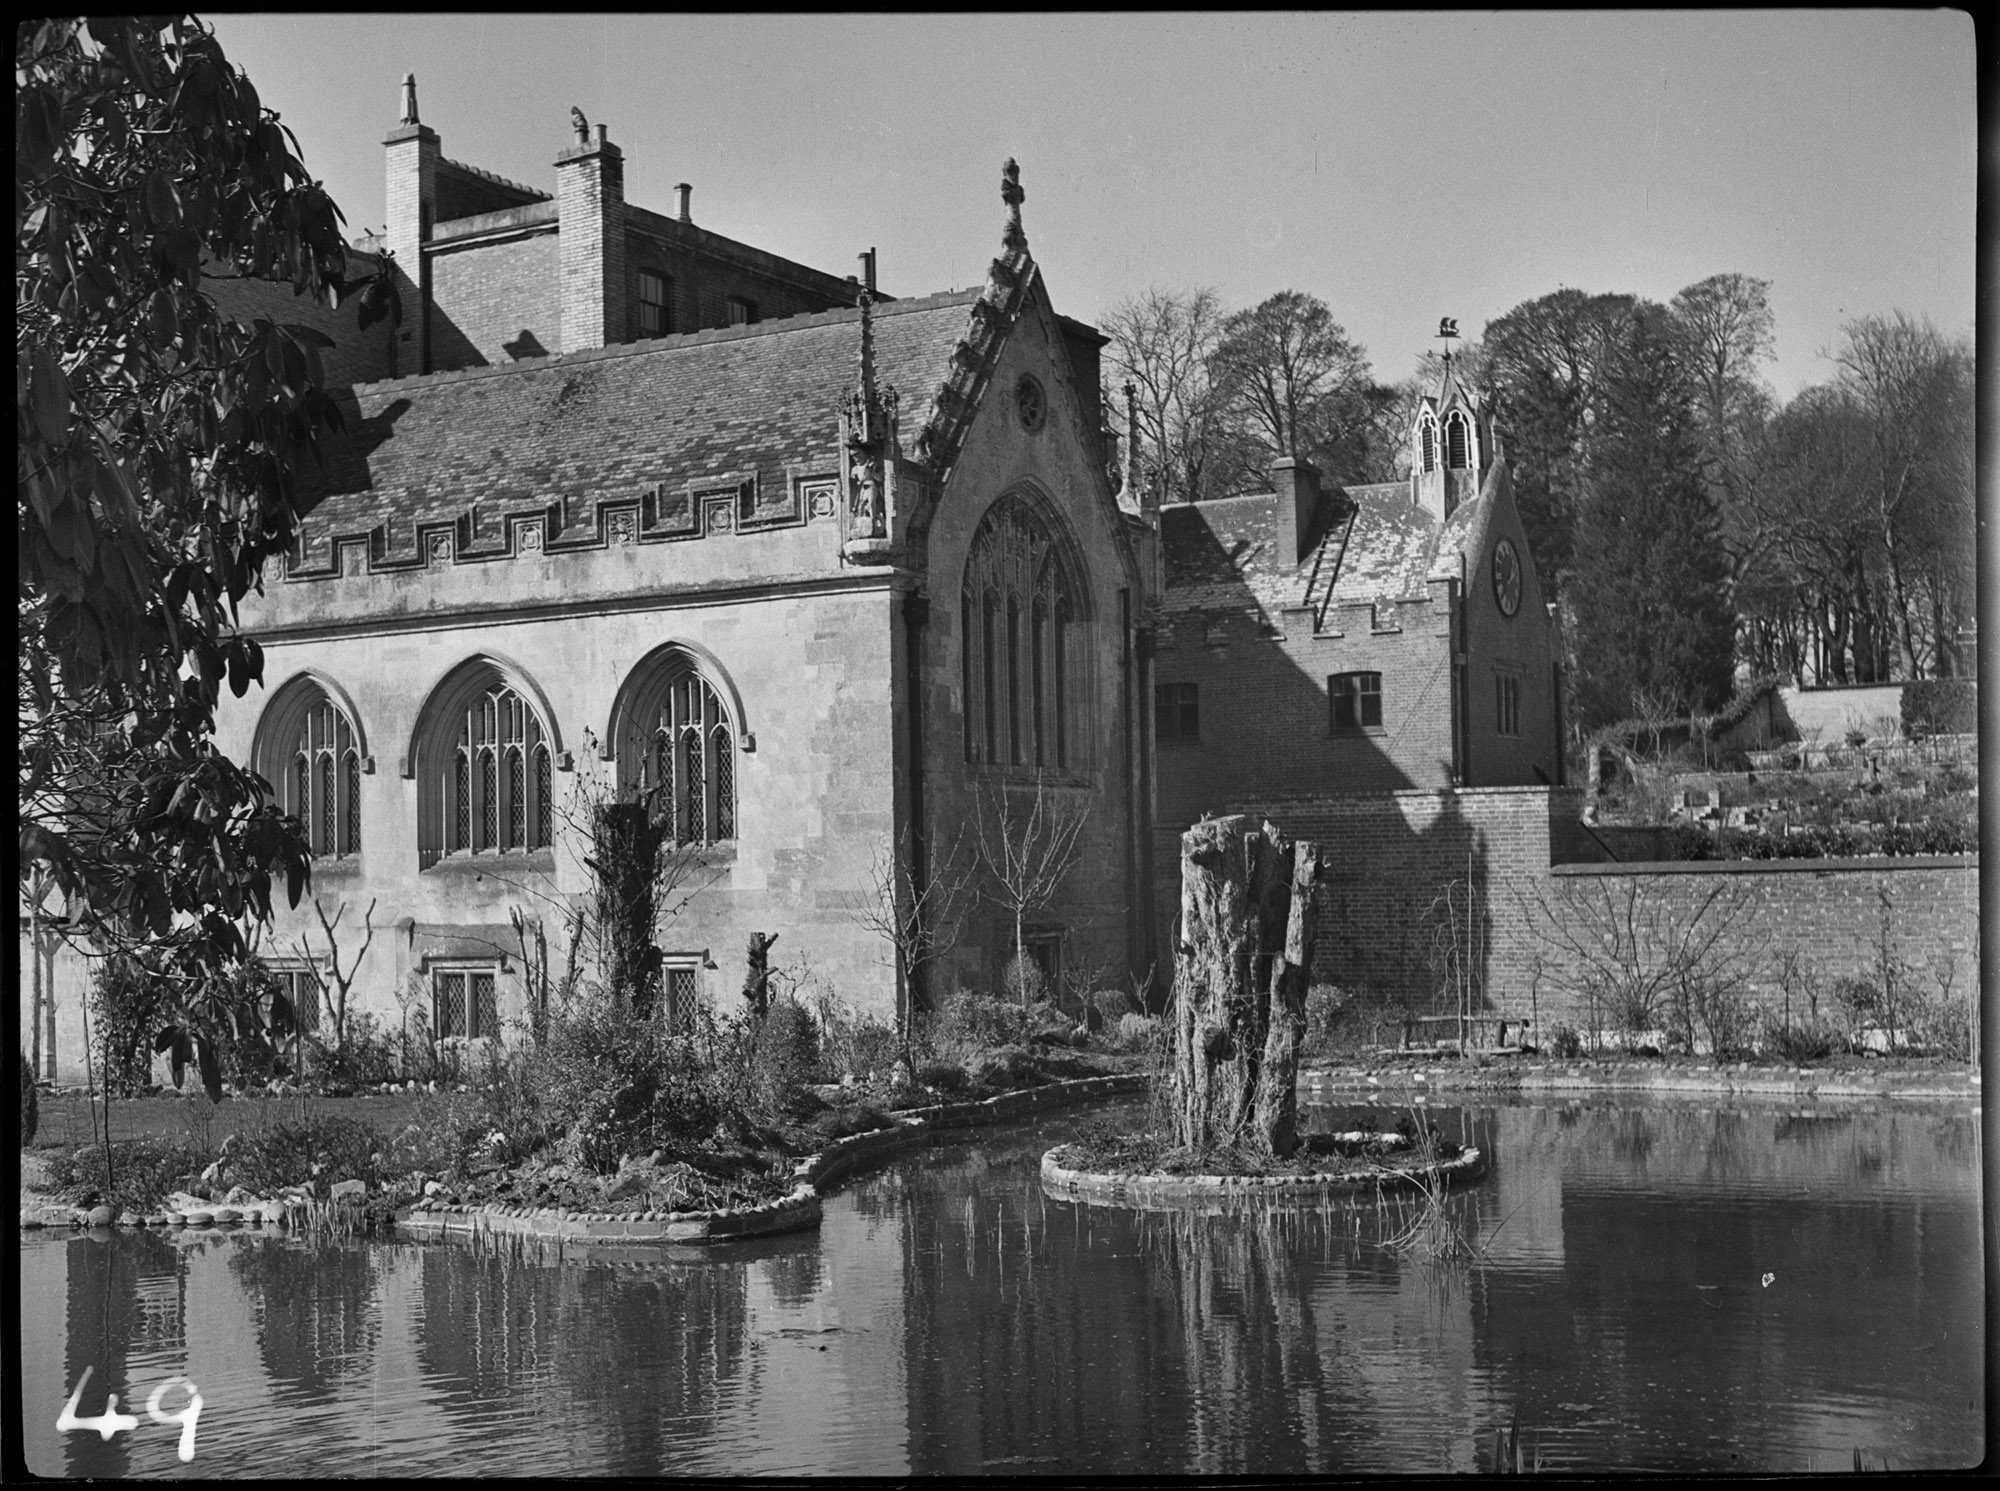 Black and white photograph of part of a country house, viewed from the other side of an ornamental pond. In the pond is a circular island with an elongated tree stump. On the far side are planted borders behind which rises a Gothic-style chapel building. Rising behind are other elements of the house.